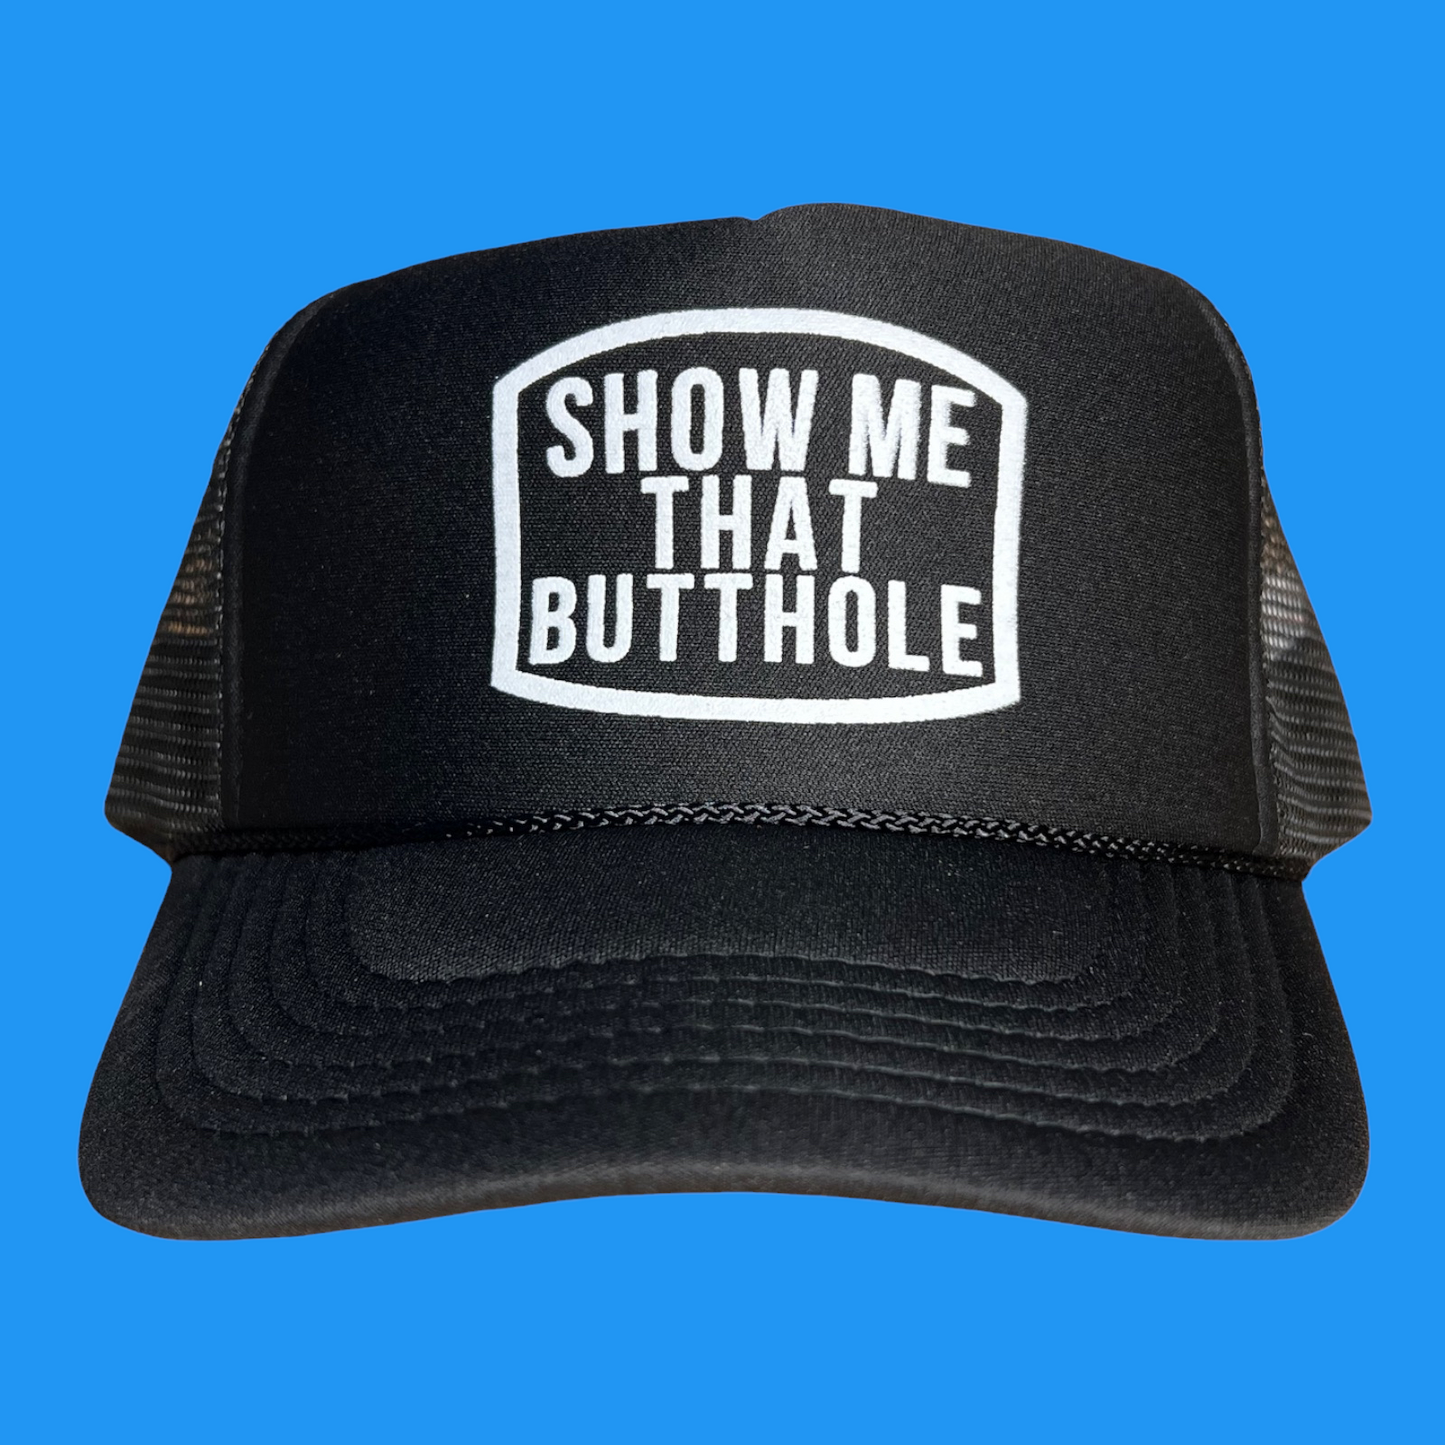 Show Me That Butthole Funny Trucker Hat Funny Trucker Hat Black